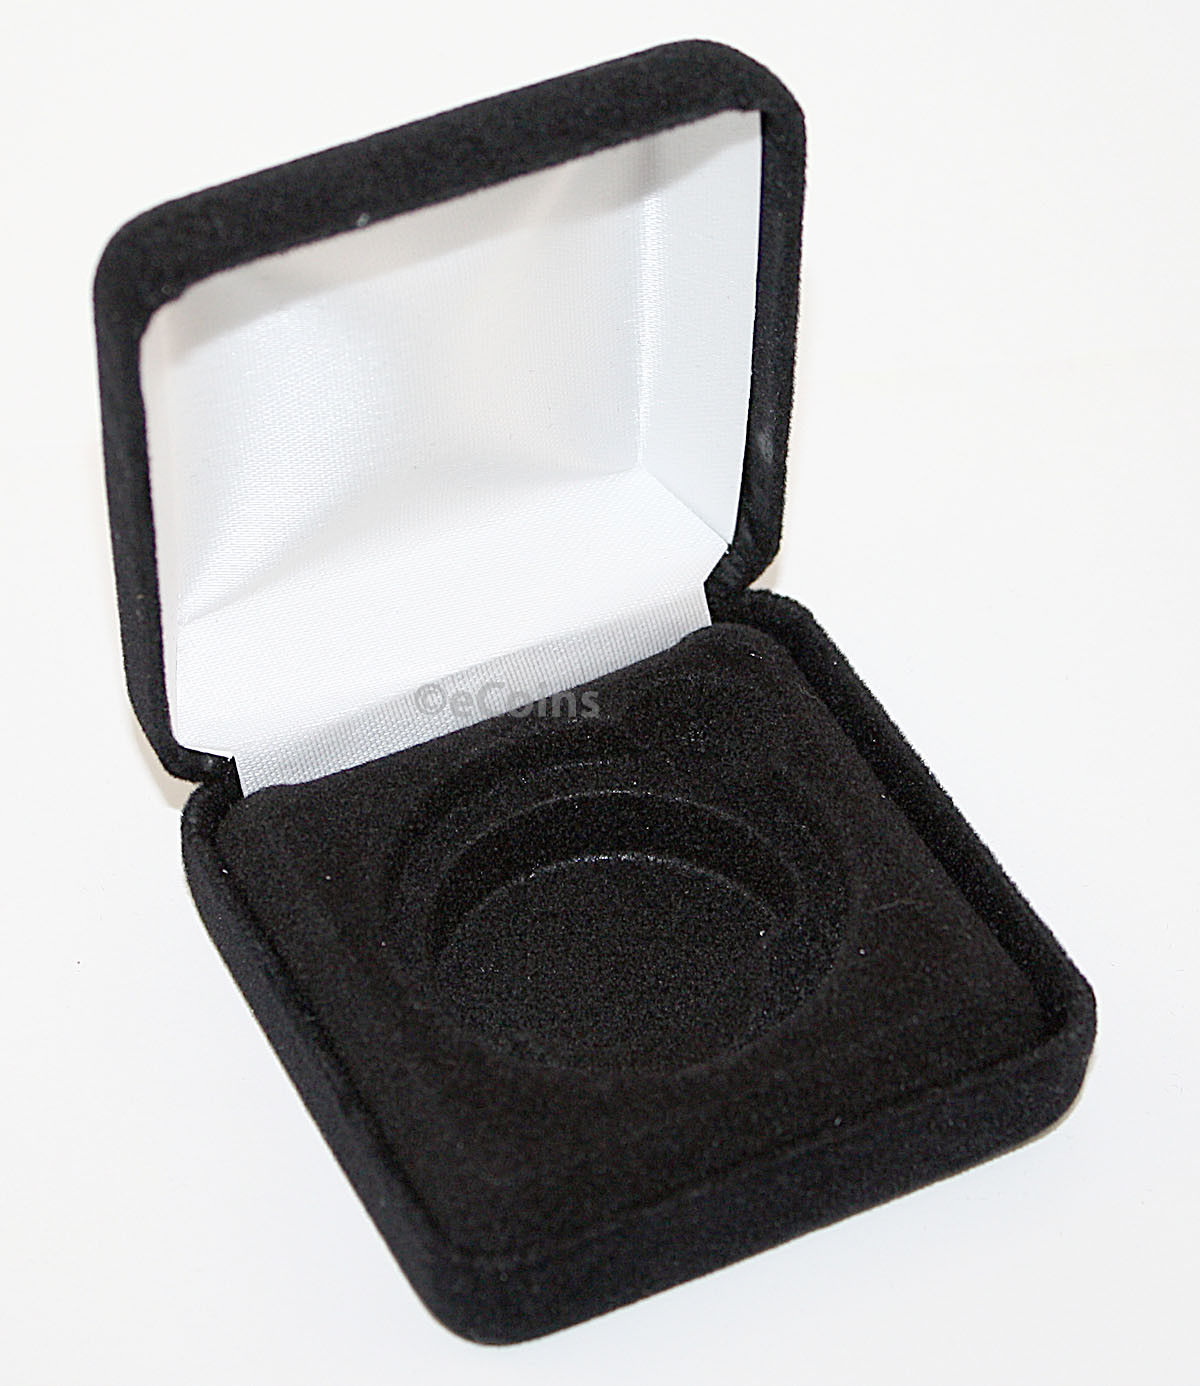 Black Felt COIN DISPLAY GIFT METAL BOX holds 1-IKE or American Silver Eagle ASE - $8.56